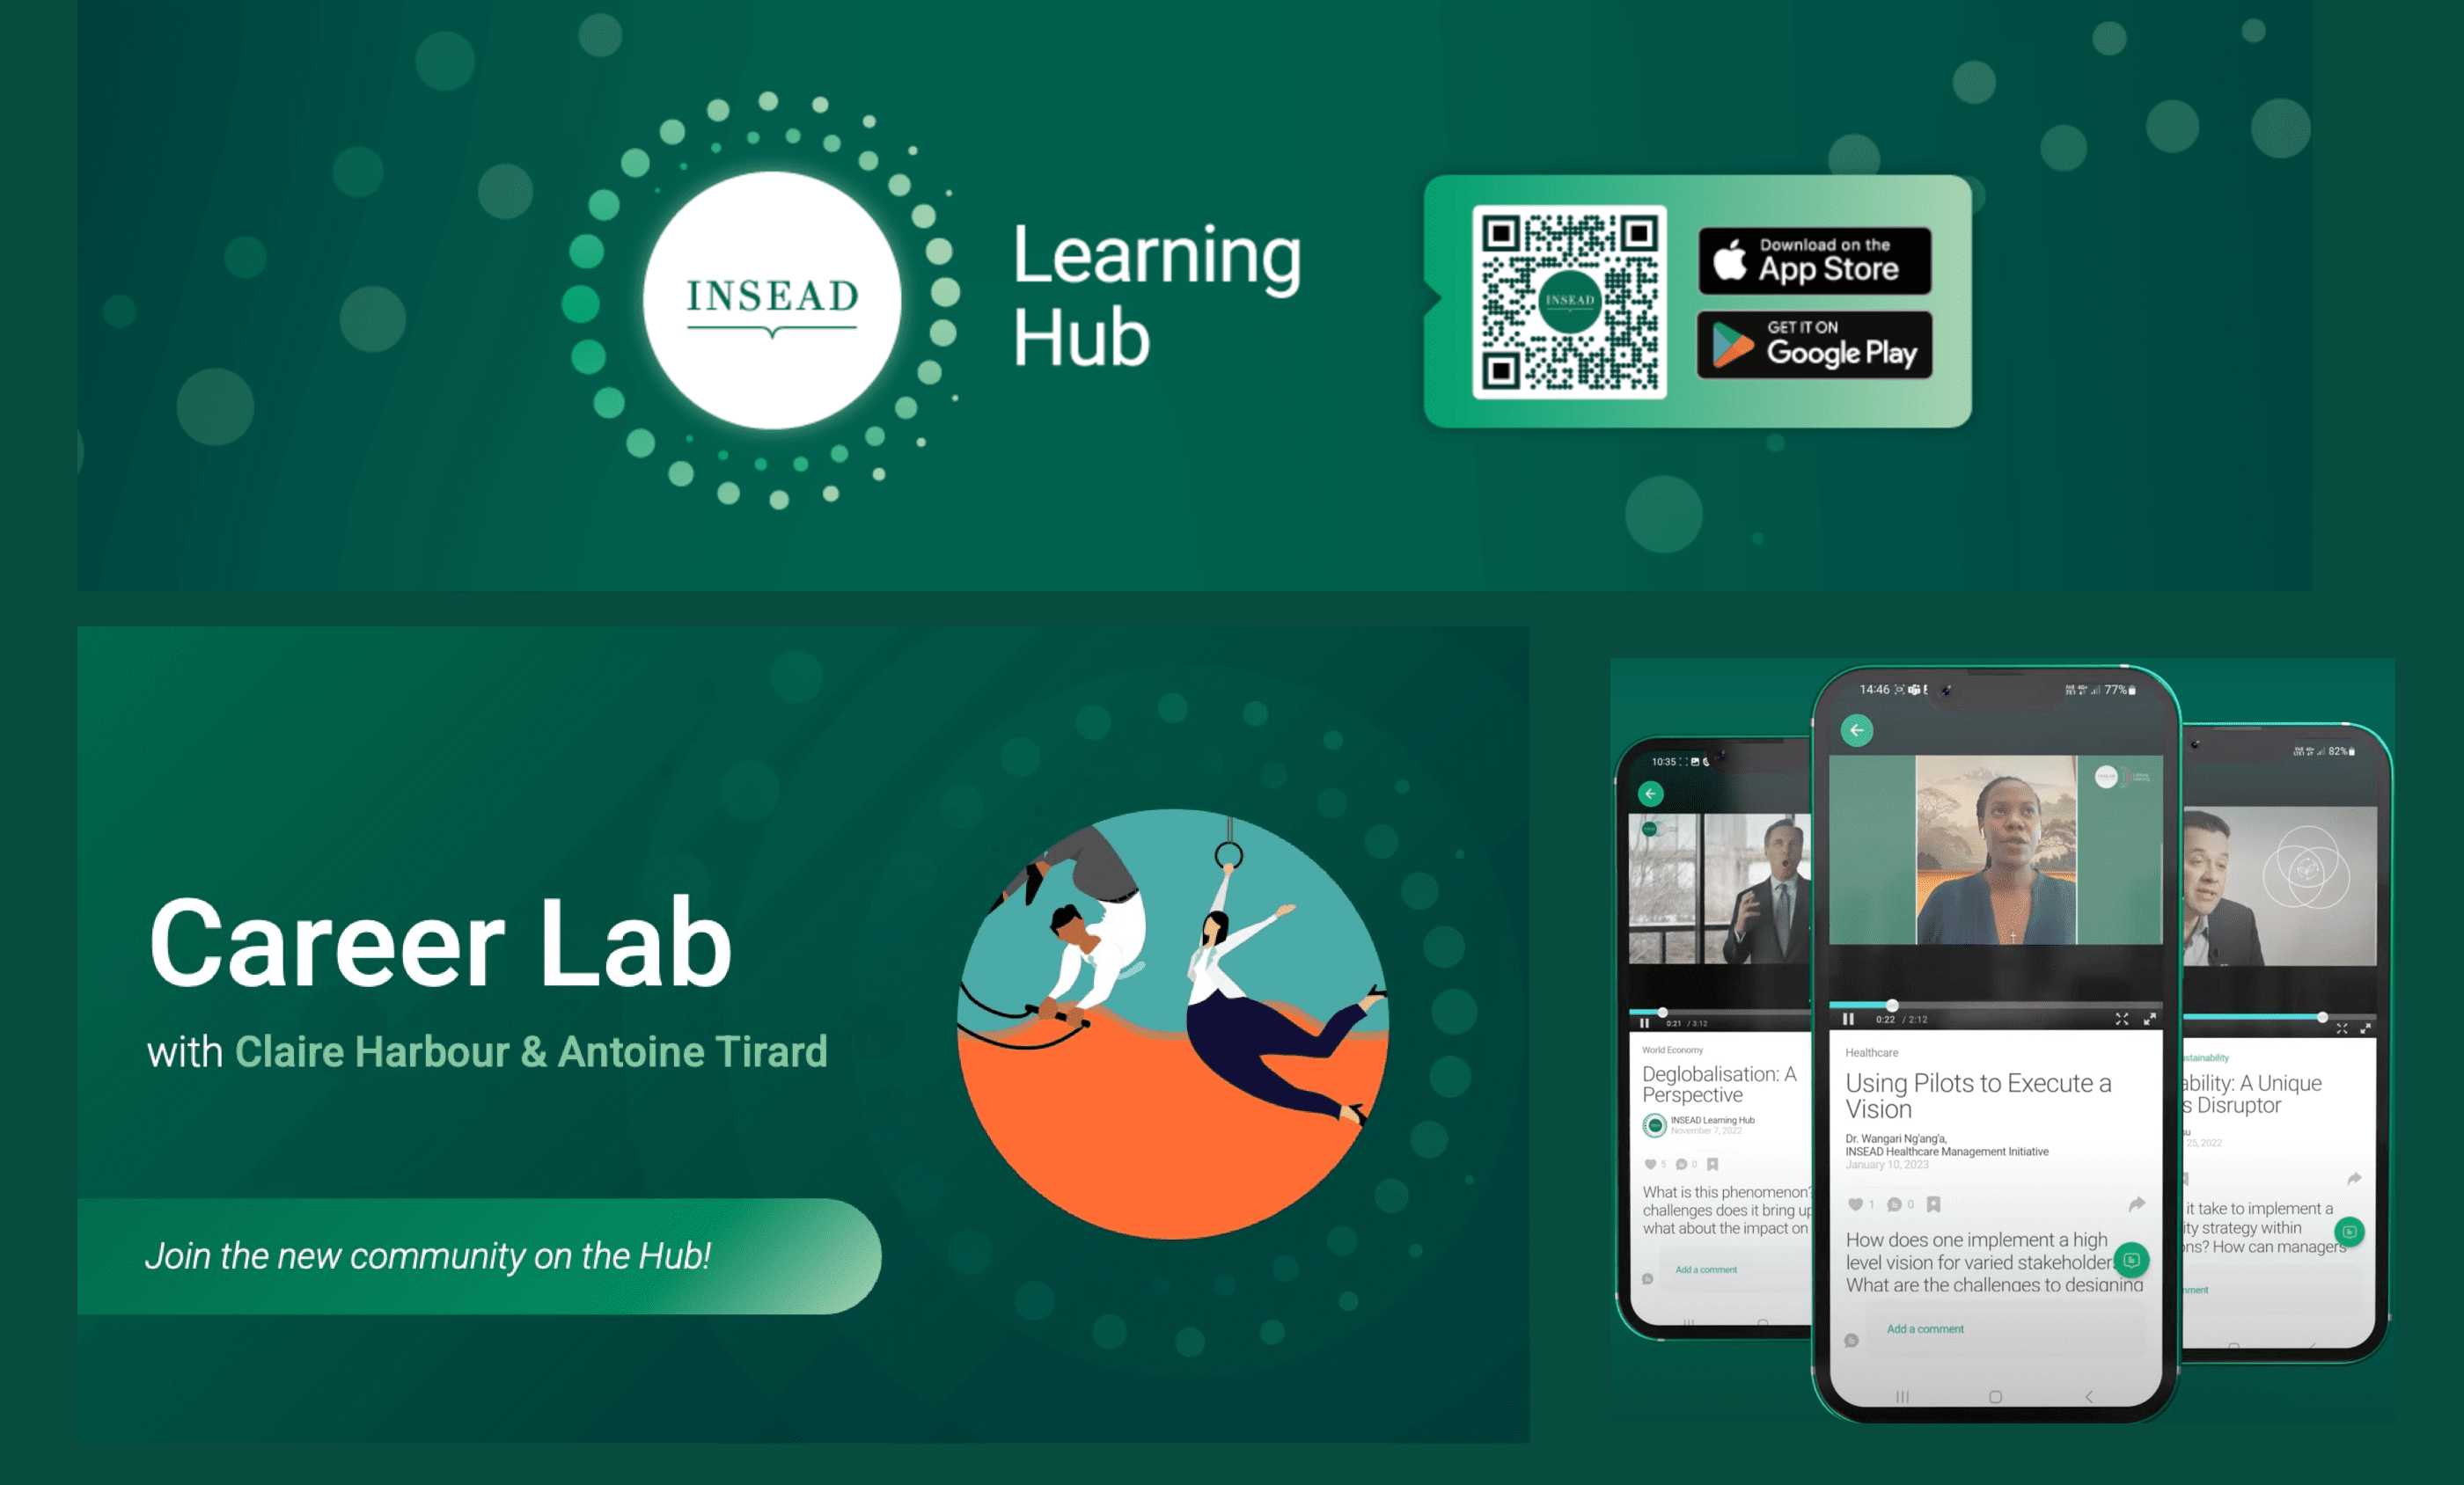 Join the Career Lab Community on the INSEAD Learning Hub